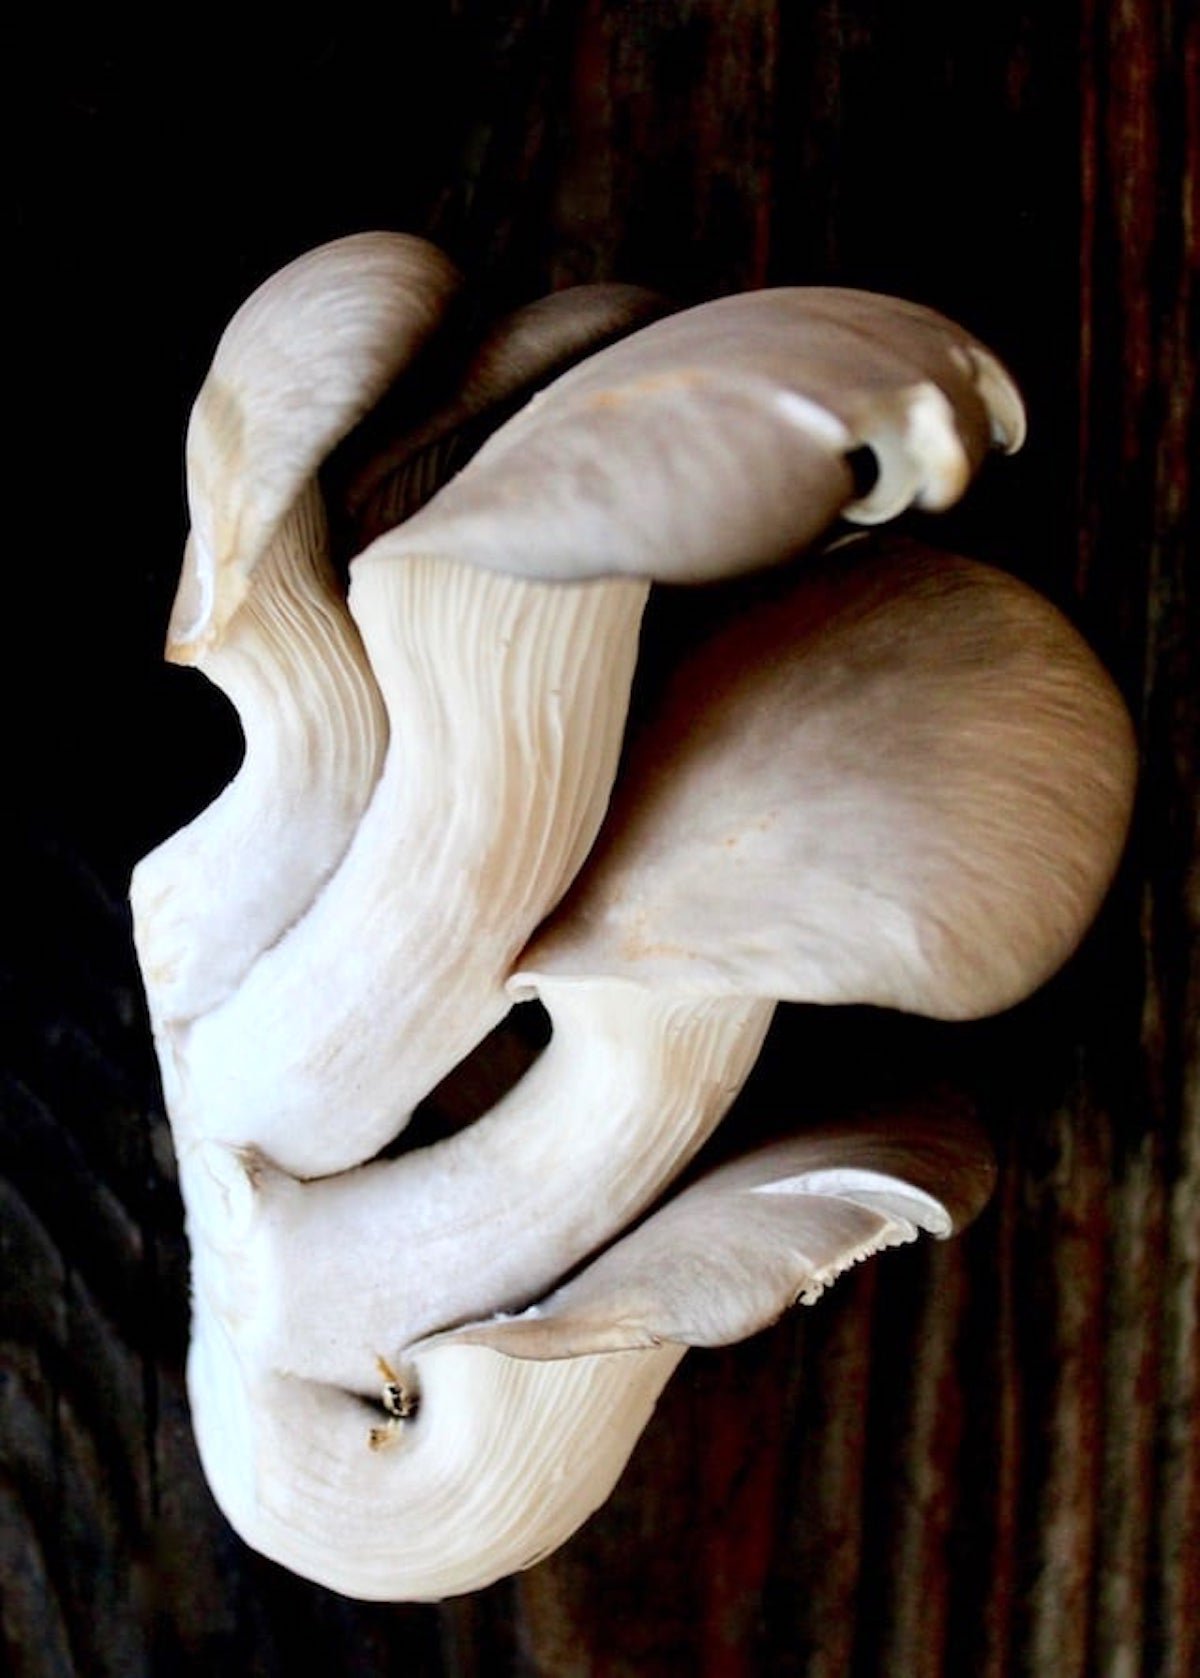 Clump of raw oyster mushrooms on wood